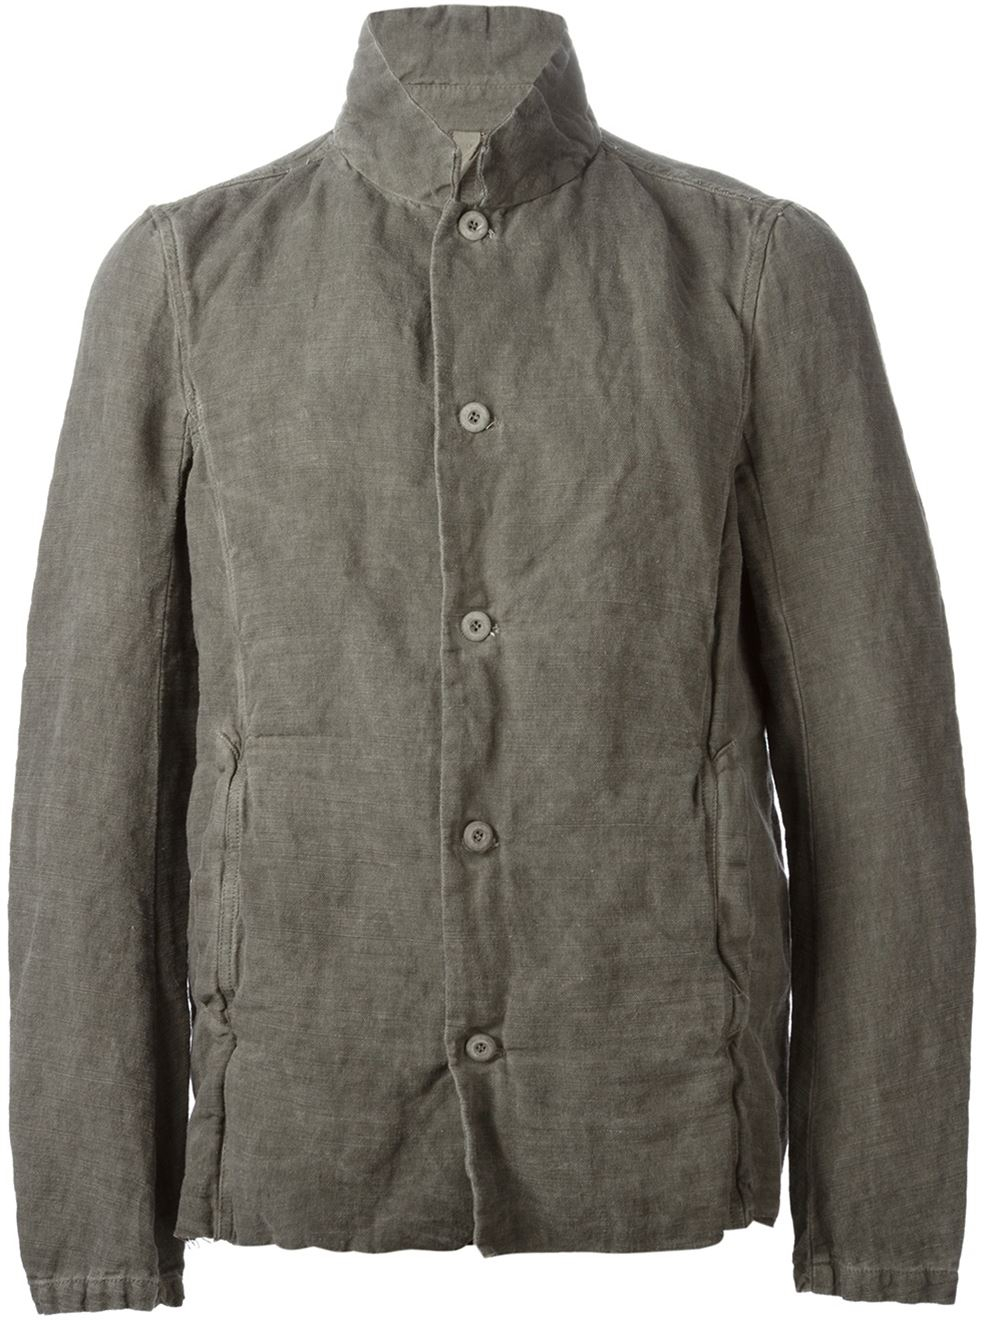 Lyst - Poeme Bohemien Buttoned Shirt Jacket in Gray for Men